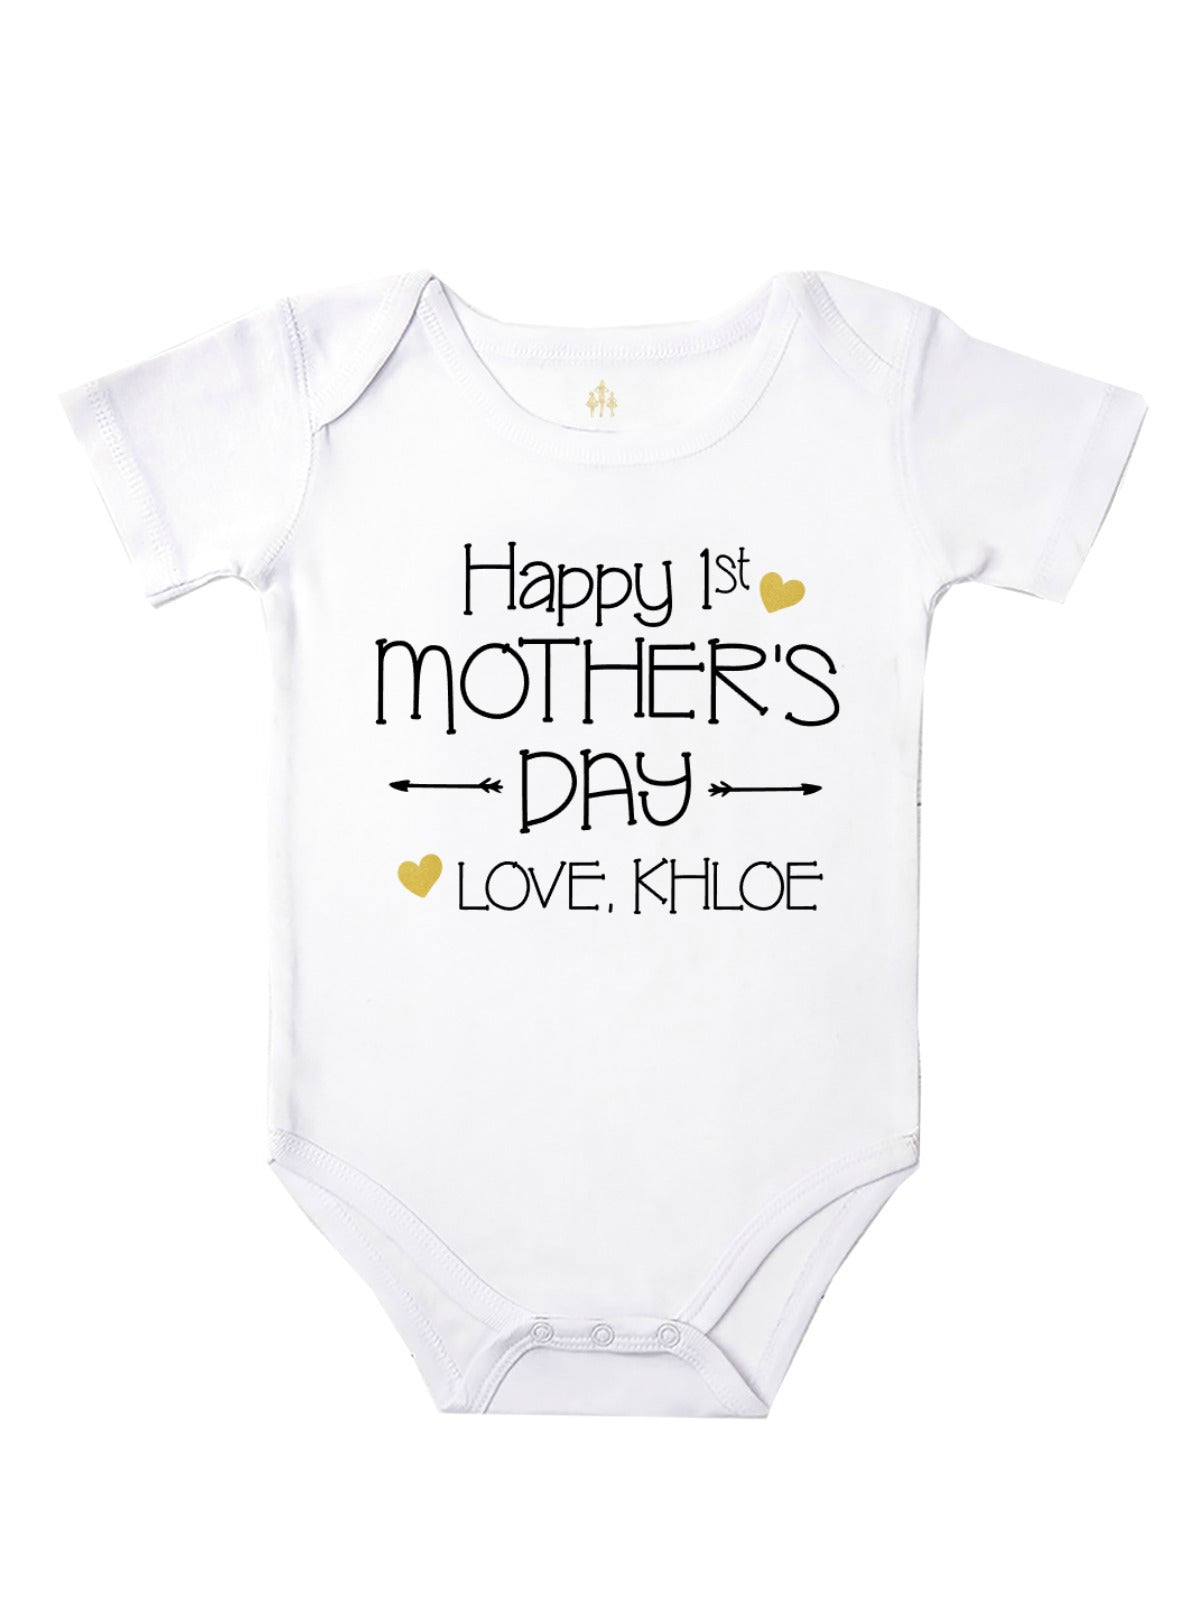 Happy 1st Mother's Day Personalized Bodysuit